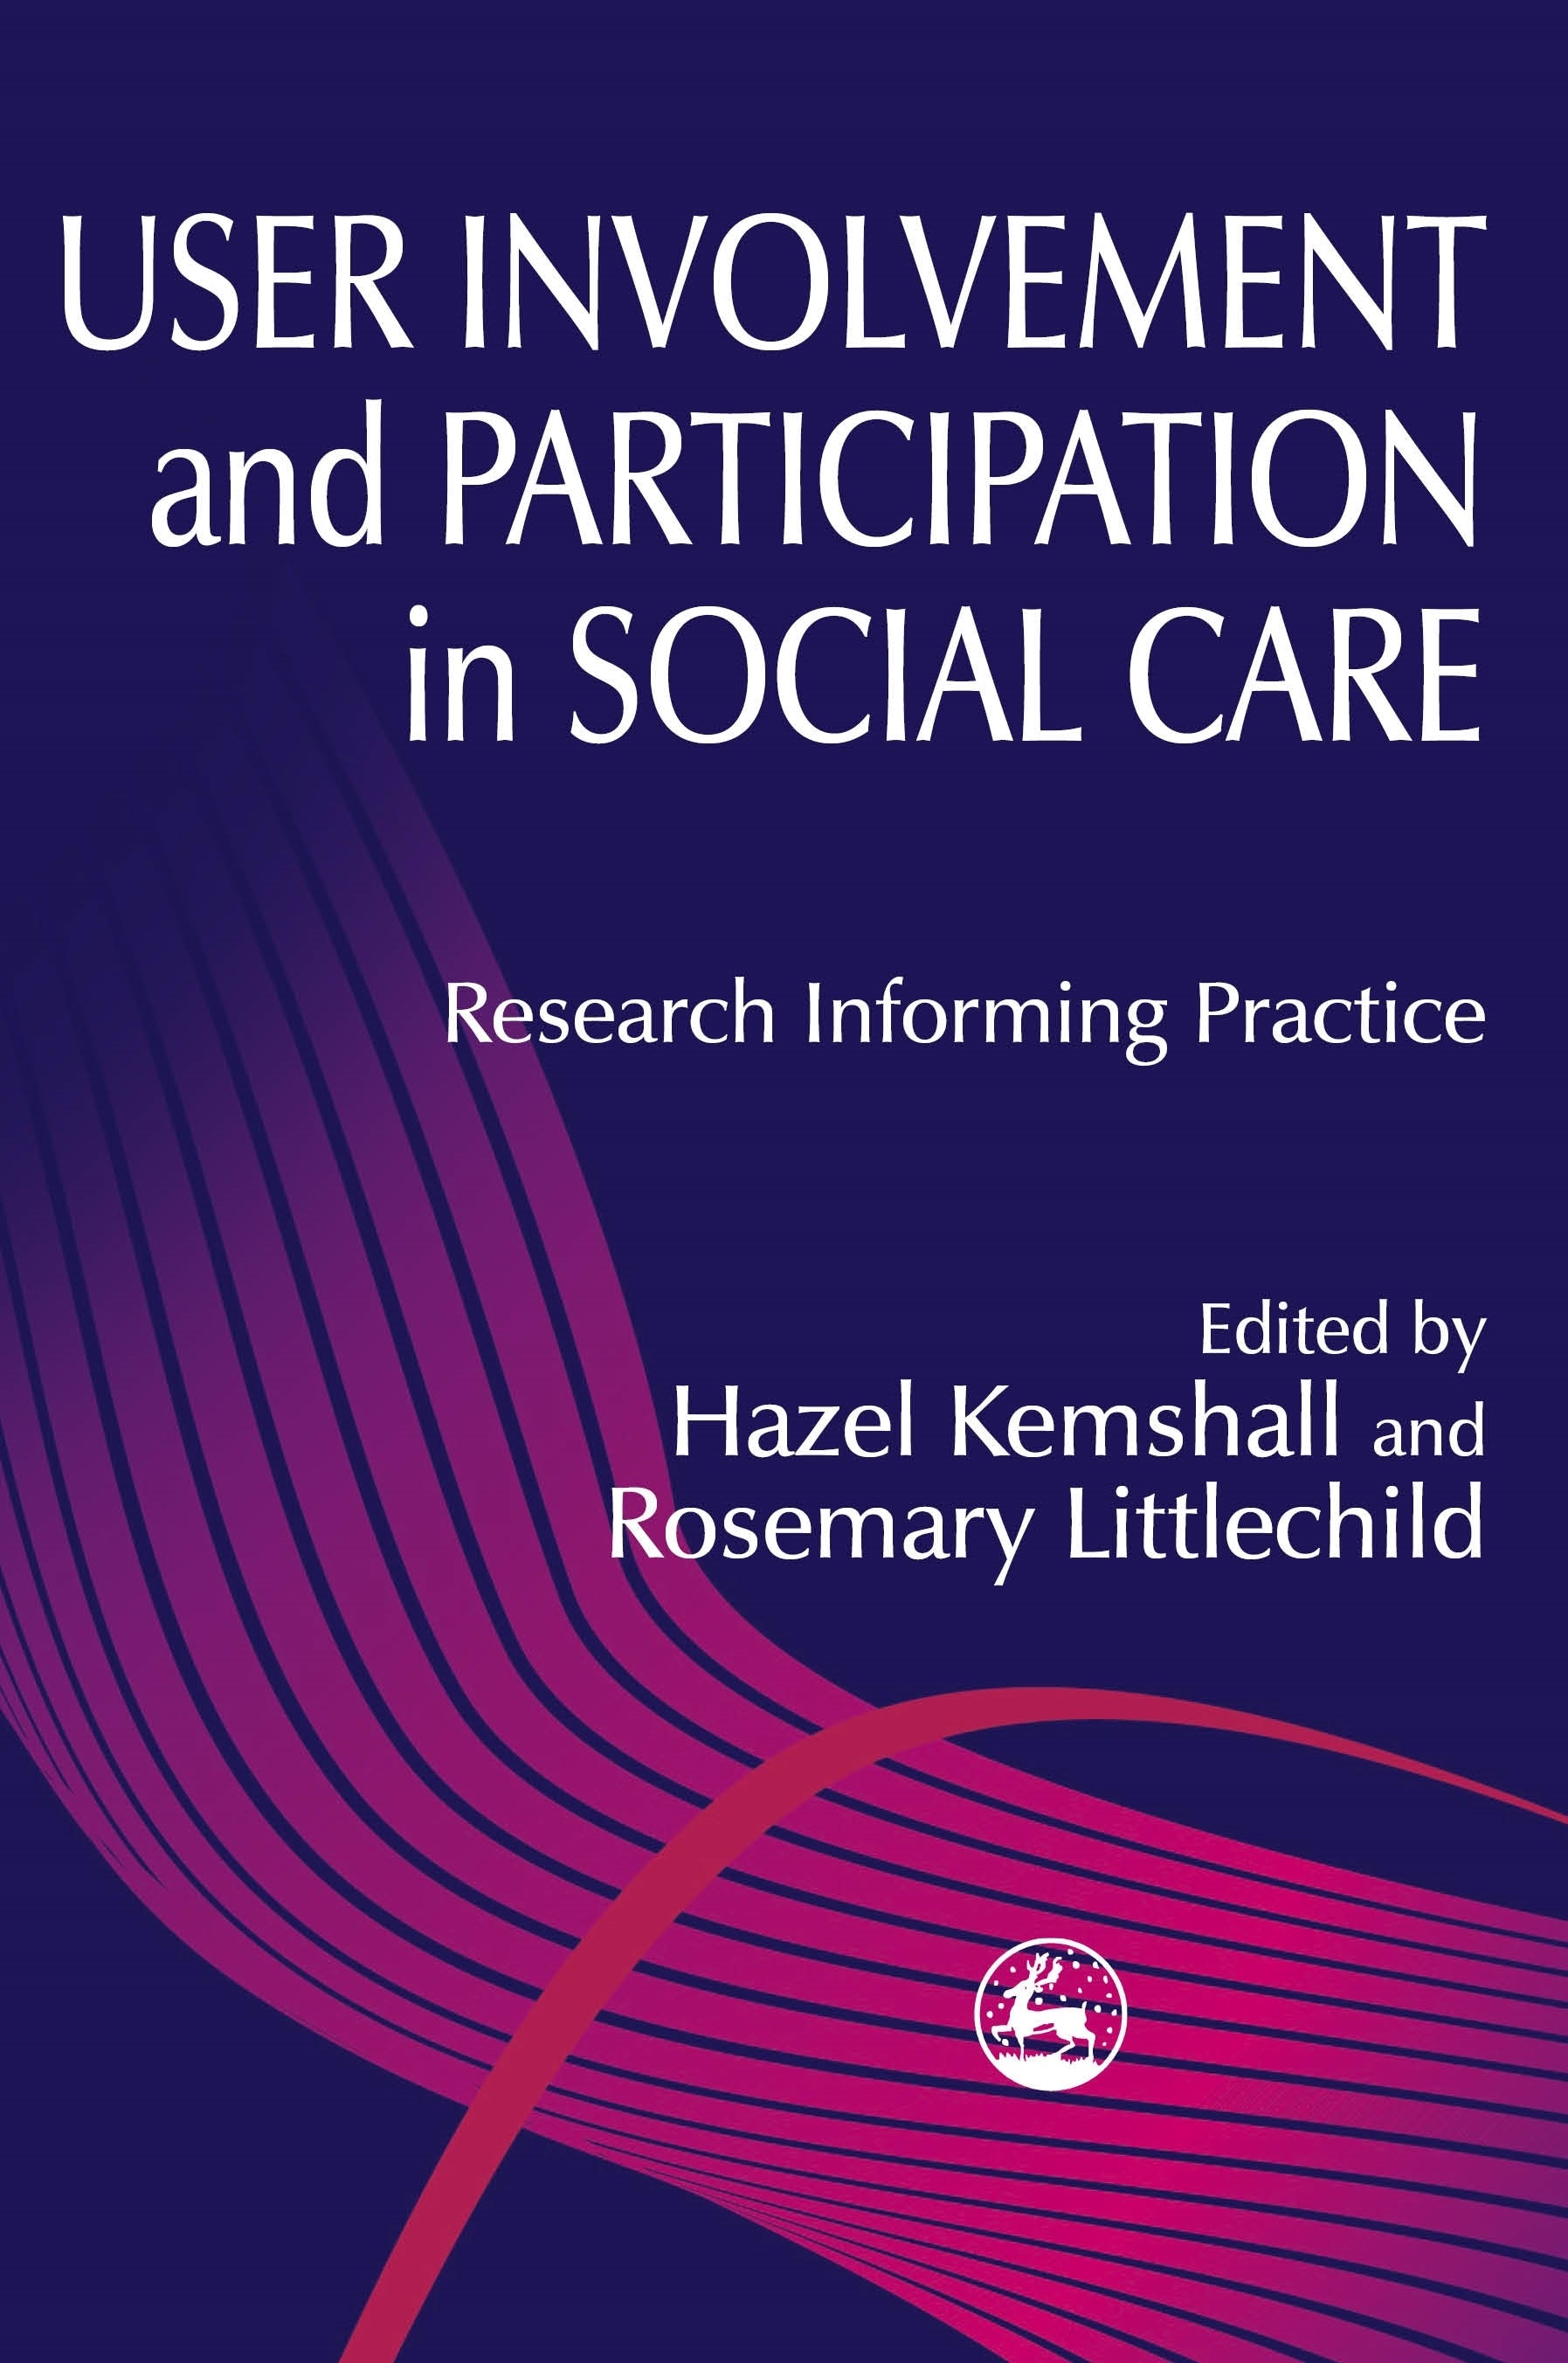 User Involvement and Participation in Social Care by Rosemary Littlechild, Ms Hazel Kemshall